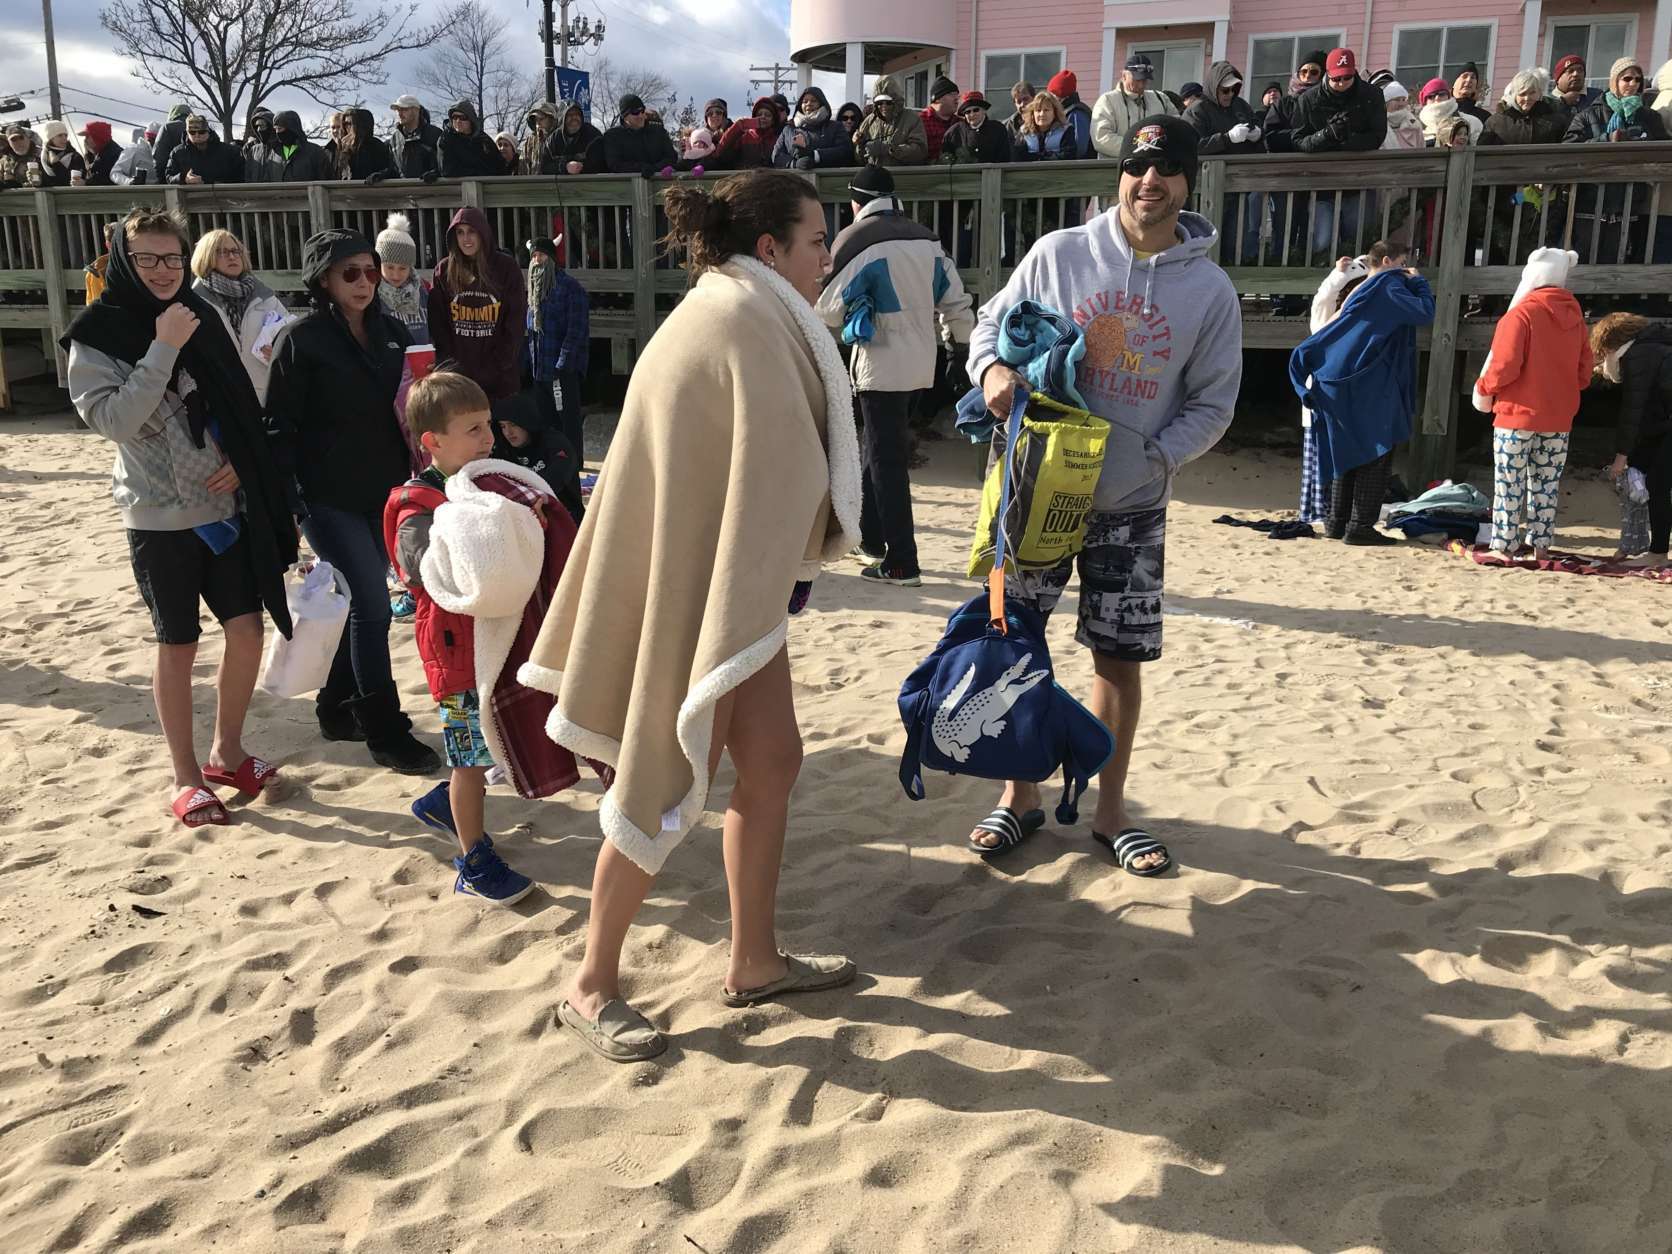 Many plungers brought blankets to bundle themselves in pre- and post-dunk. (WTOP/Michelle Basch)